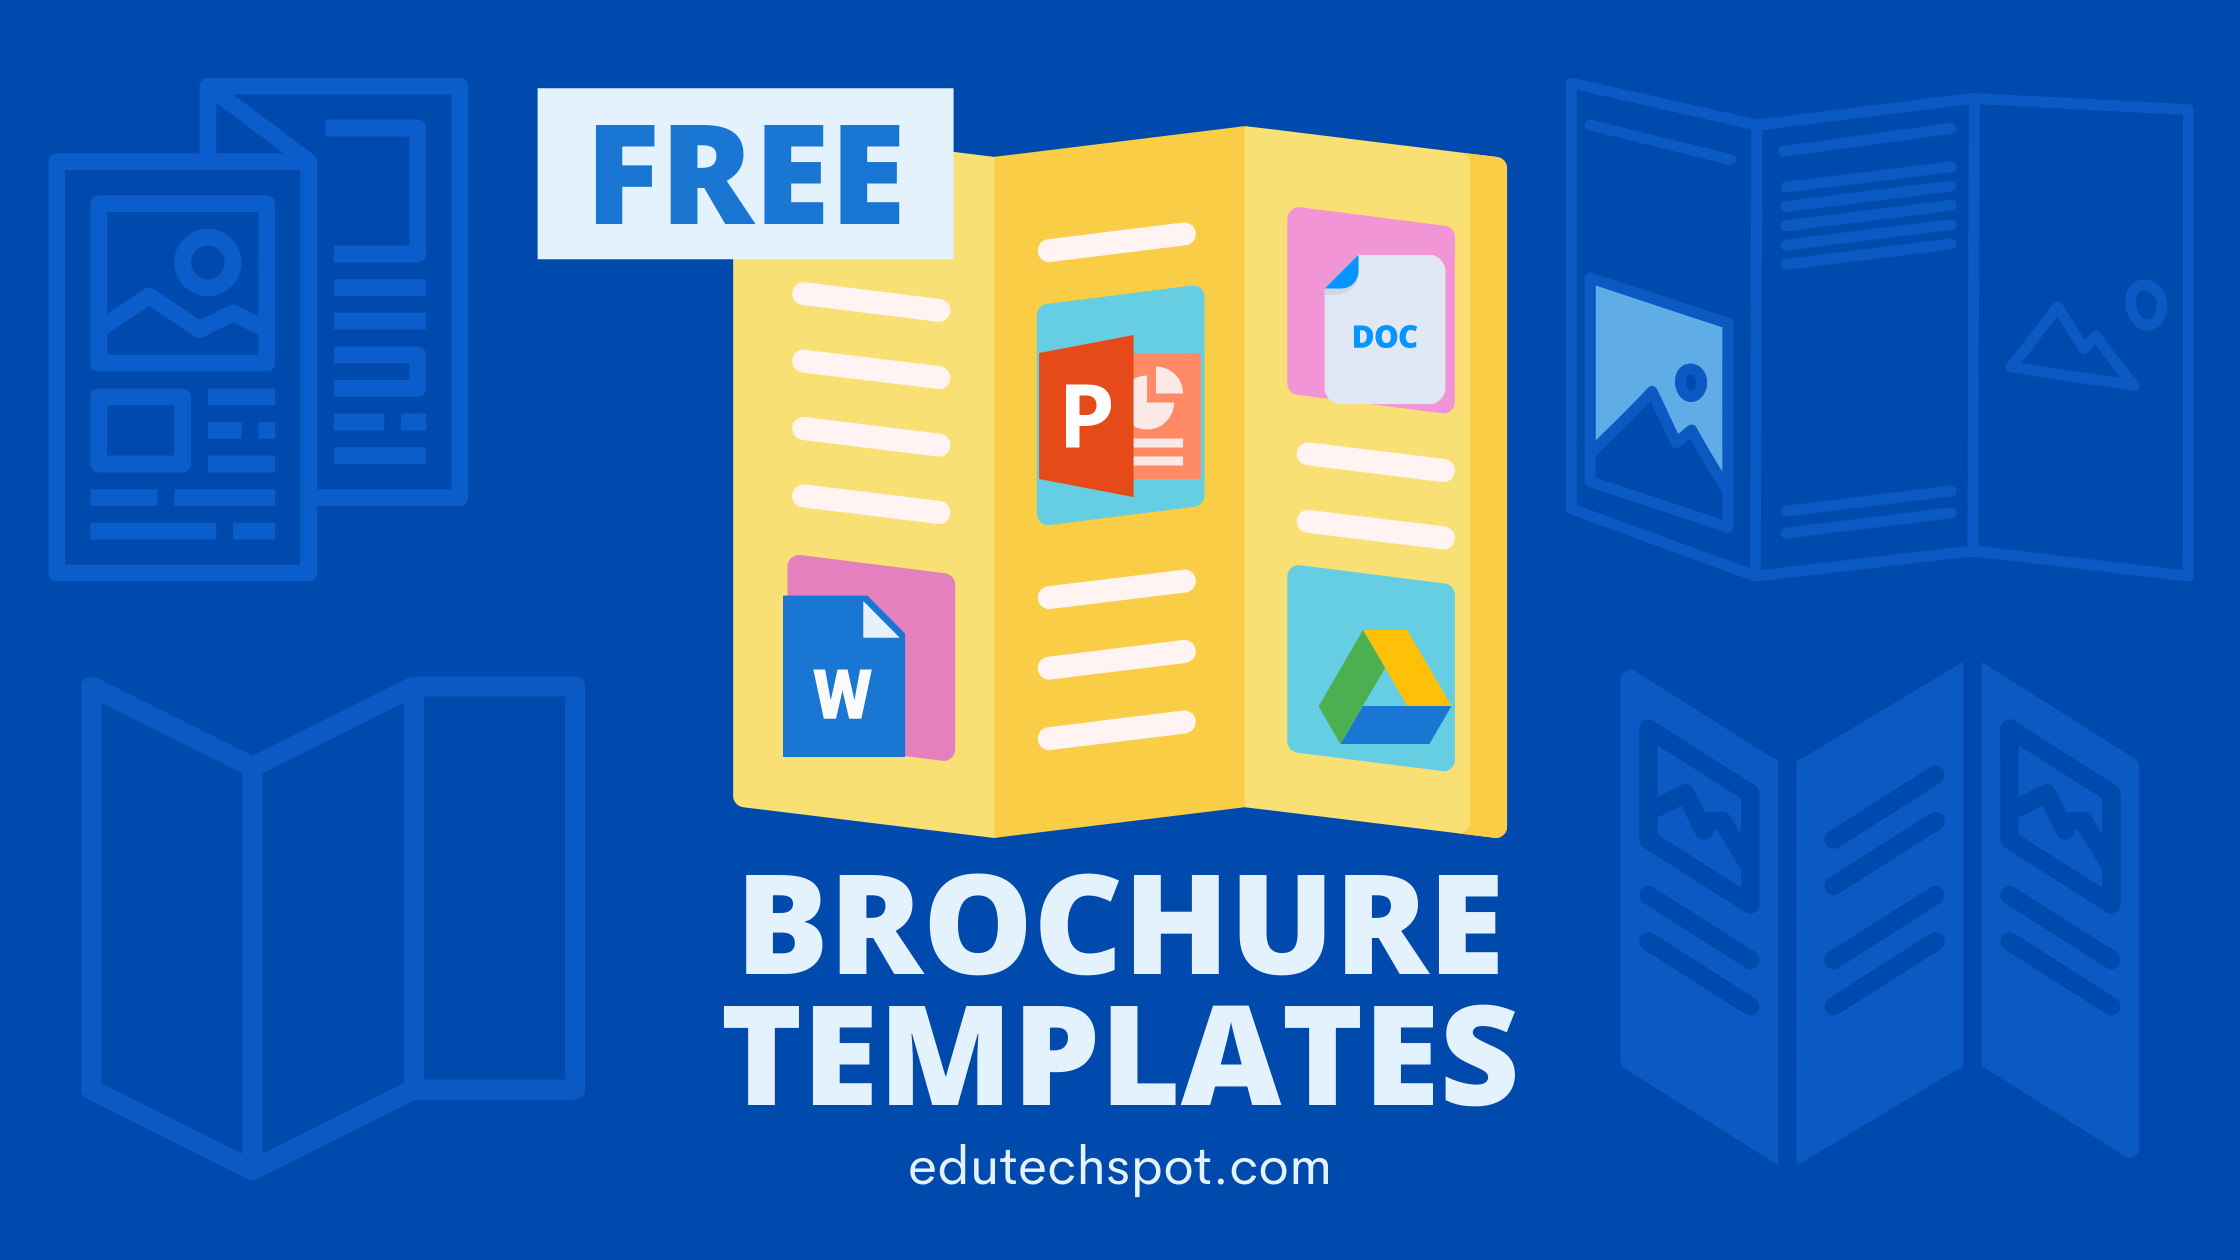 Brochure Template for google docs, Words, Power Point, Slides [ FREE ] In Google Drive Templates Brochure